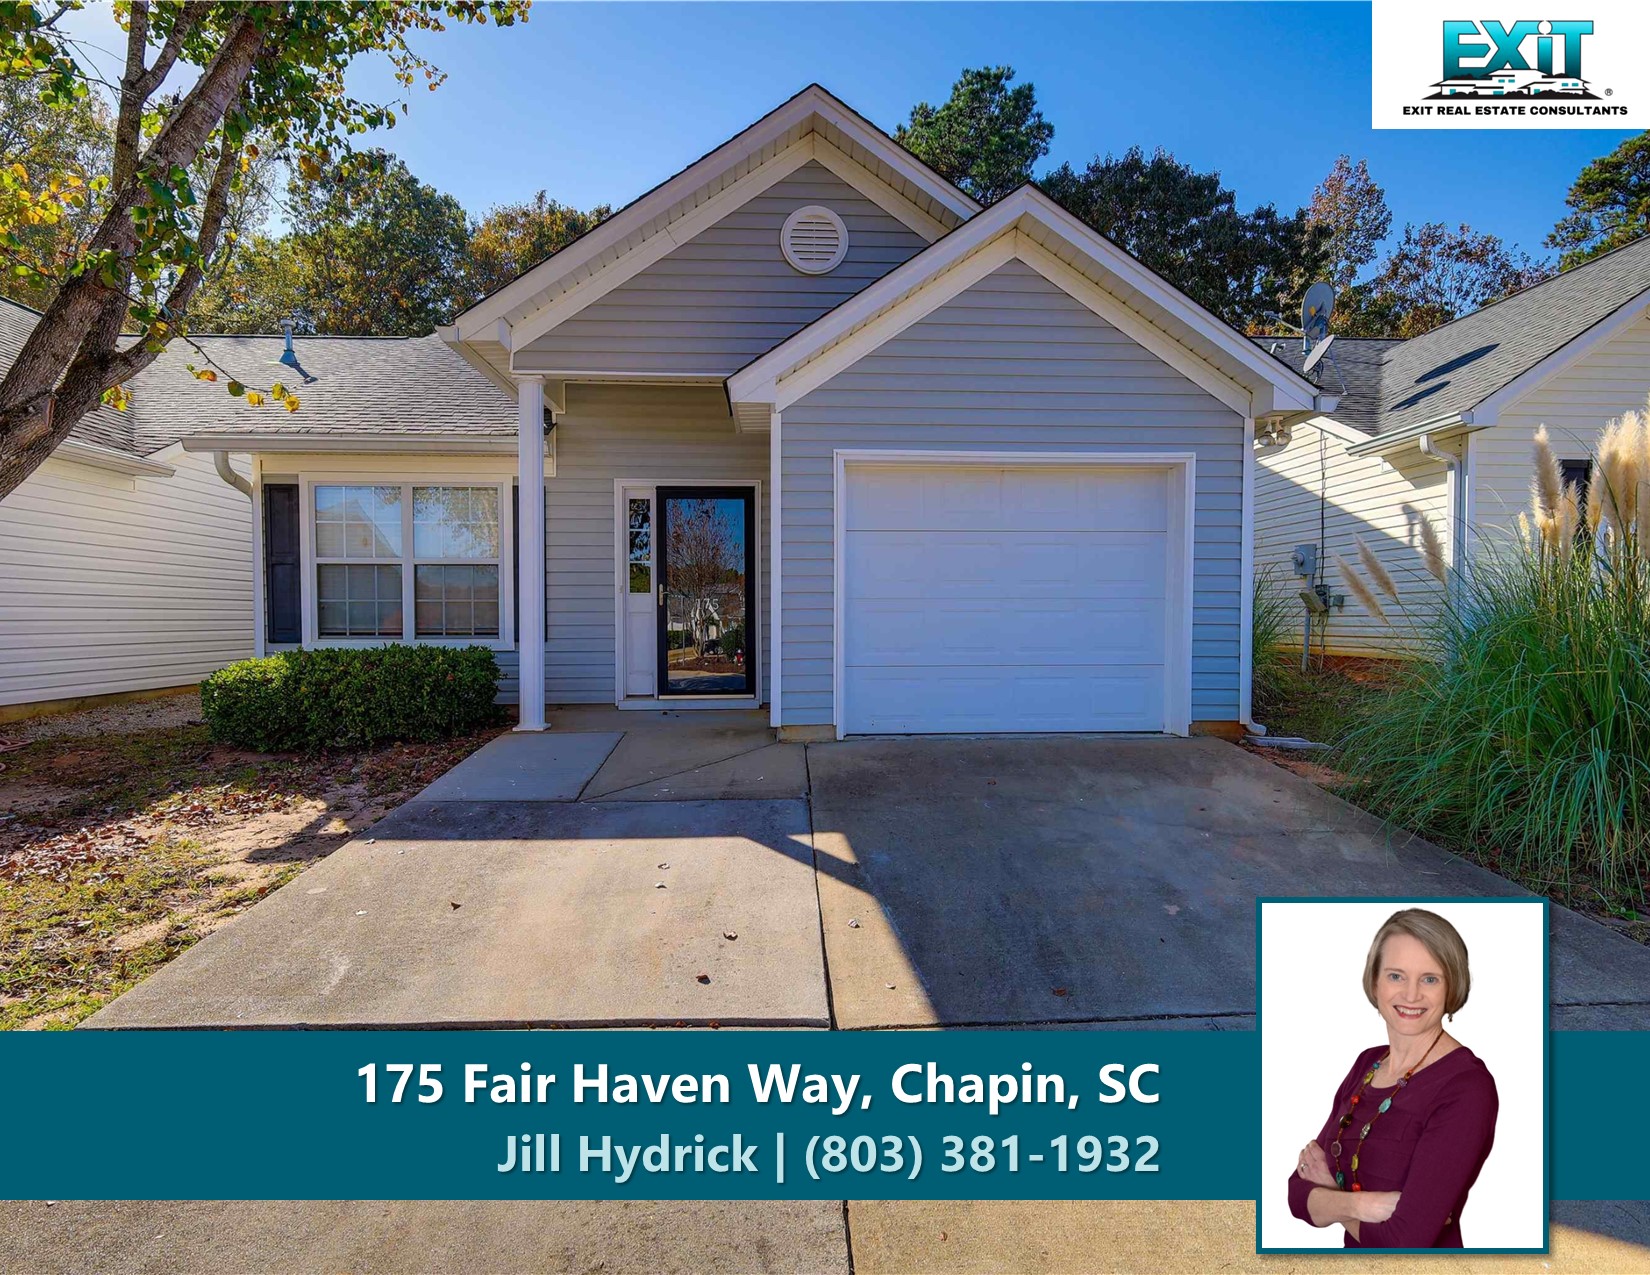 Just listed in Fairhaven - Chapin